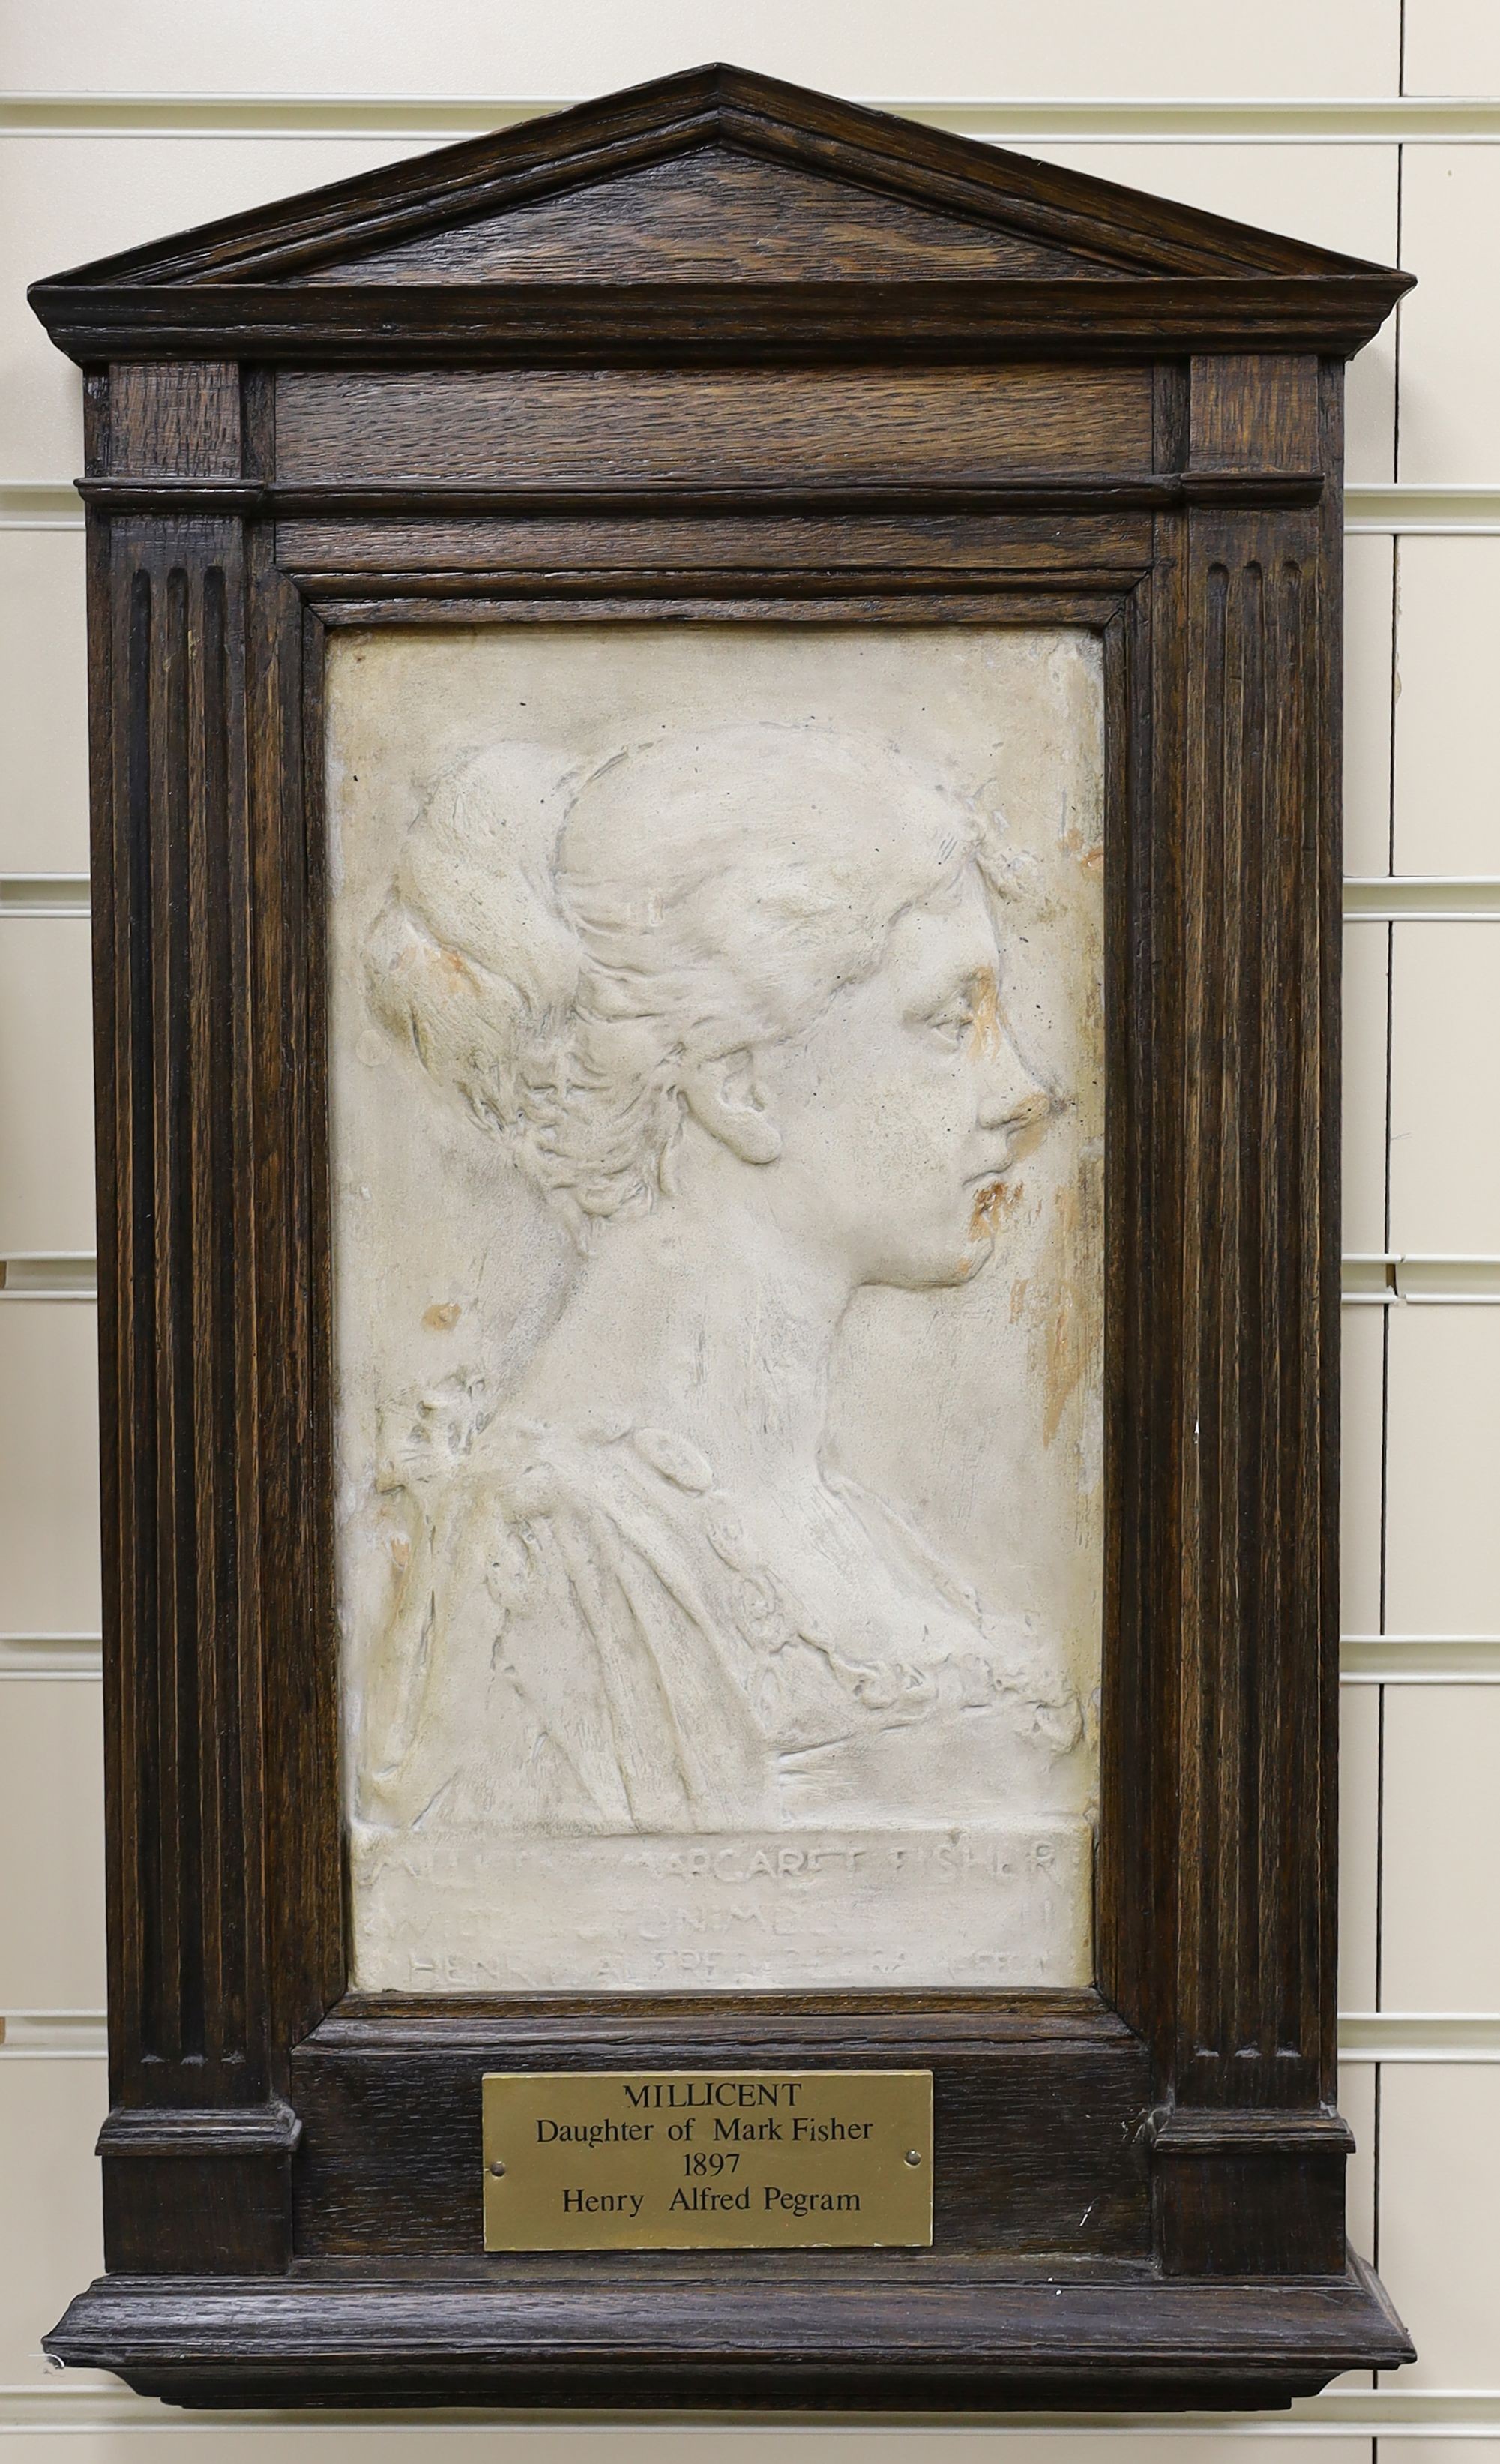 After Henry Alfred Pegram, ‘Millicent, Daughter of Mark Fisher’, a plaster relief panel in an architectural oak wall-hanging frame